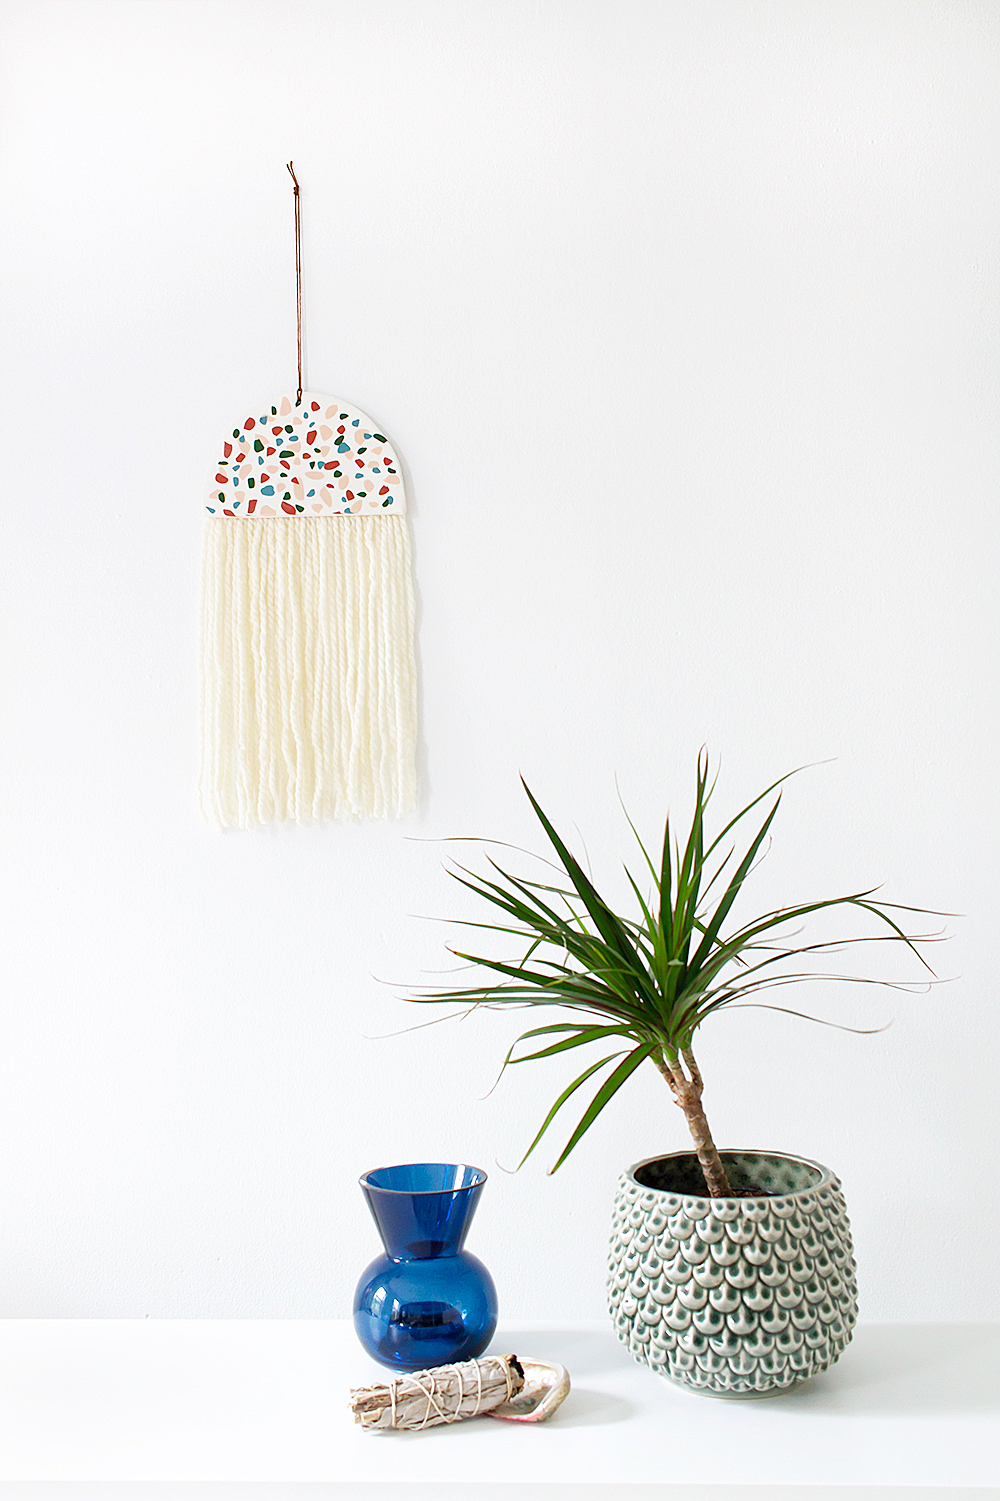 10 Must-See Summer Home Decor DIY Projects /// Guest Post by Marlene from Idle Hands Awake on Design Fixation #diy #summer #decor